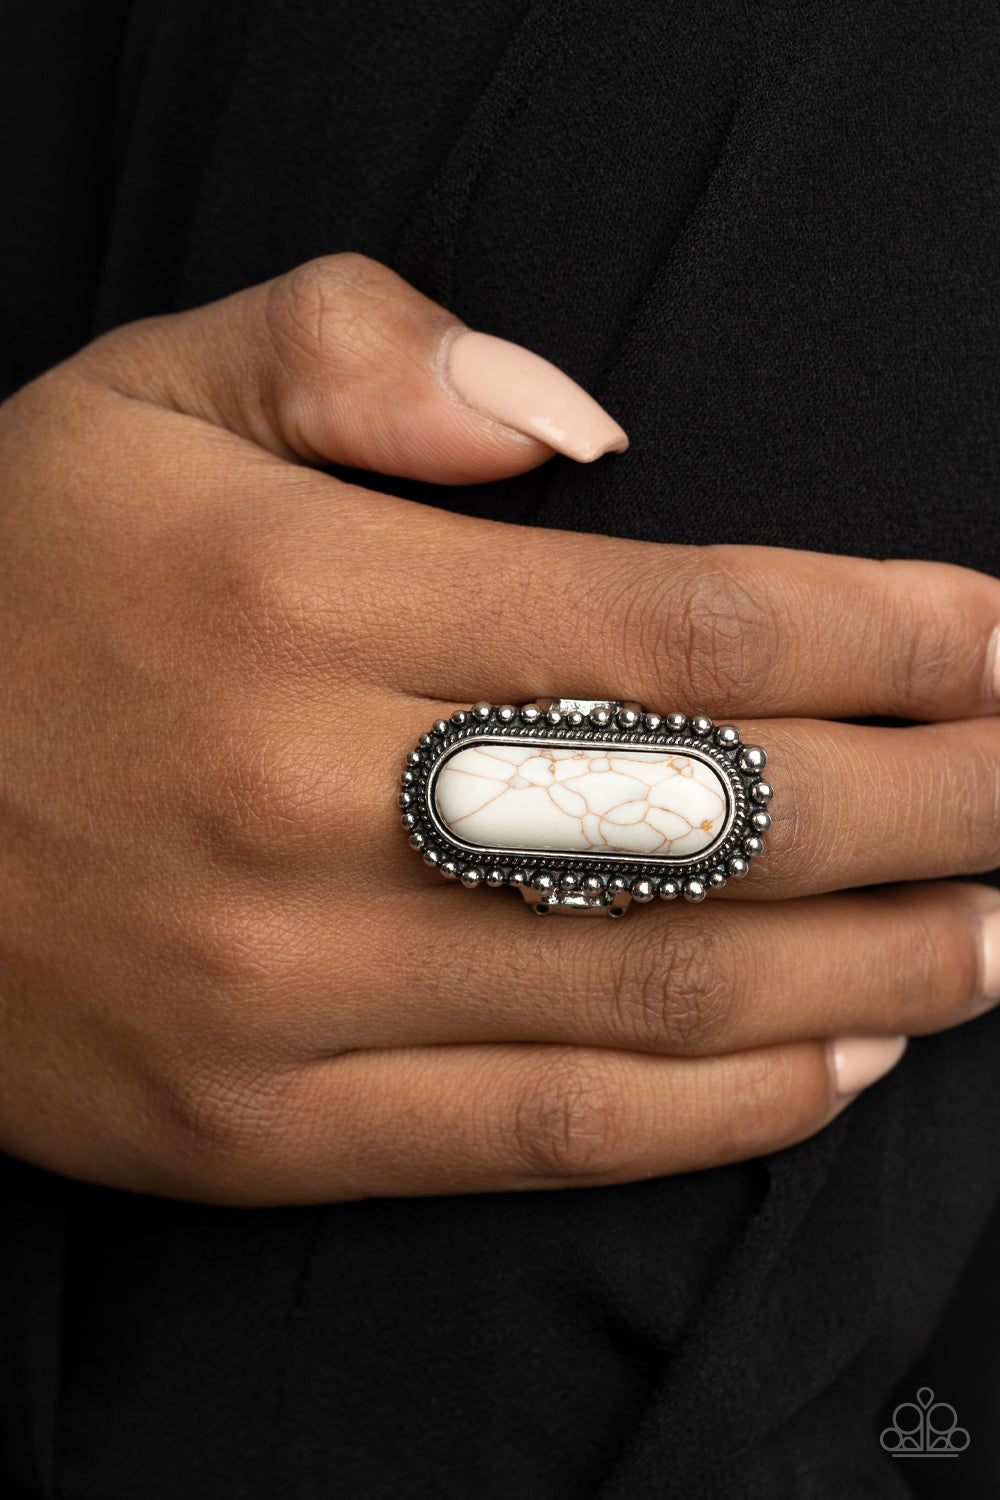 Sedona Scene White Ring - Paparazzi Accessories  An oblong white stone is nestled inside an oversized studded silver frame, creating a colorfully rustic centerpiece atop the finger. Features a stretchy band for a flexible fit.  All Paparazzi Accessories are lead free and nickel free!  Sold as one individual ring.